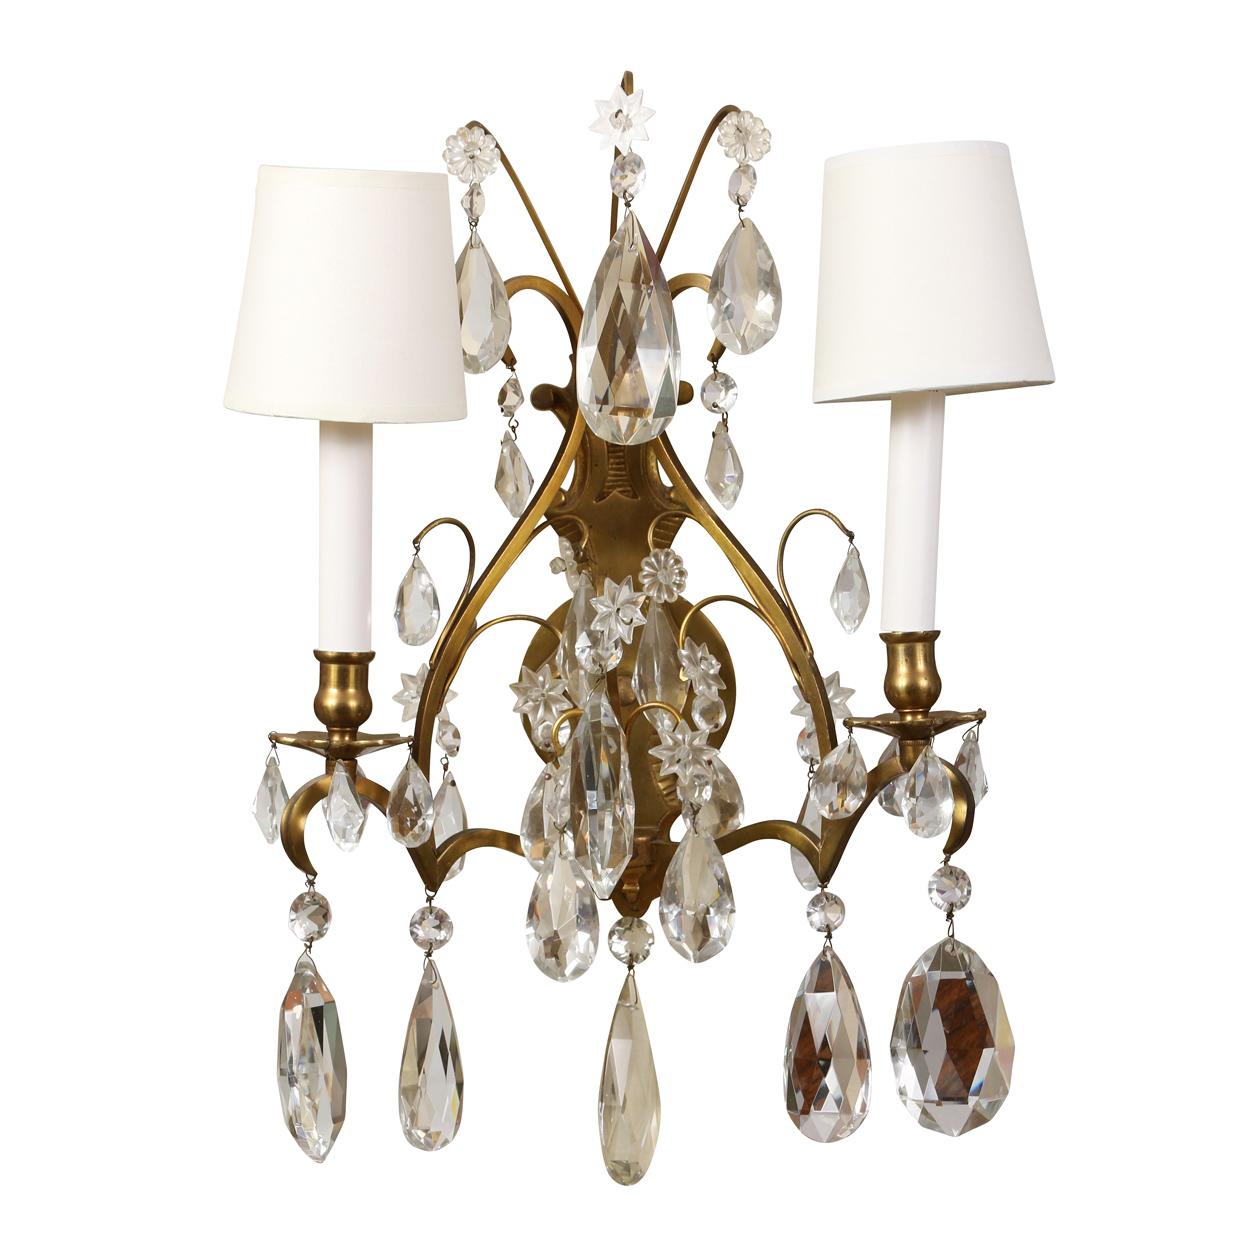 A vintage pair of two arm sconces with arched gilt metal back and large hanging crystals from multiple tiers for a beautiful effect with both heavy crystals and smaller rosettes.